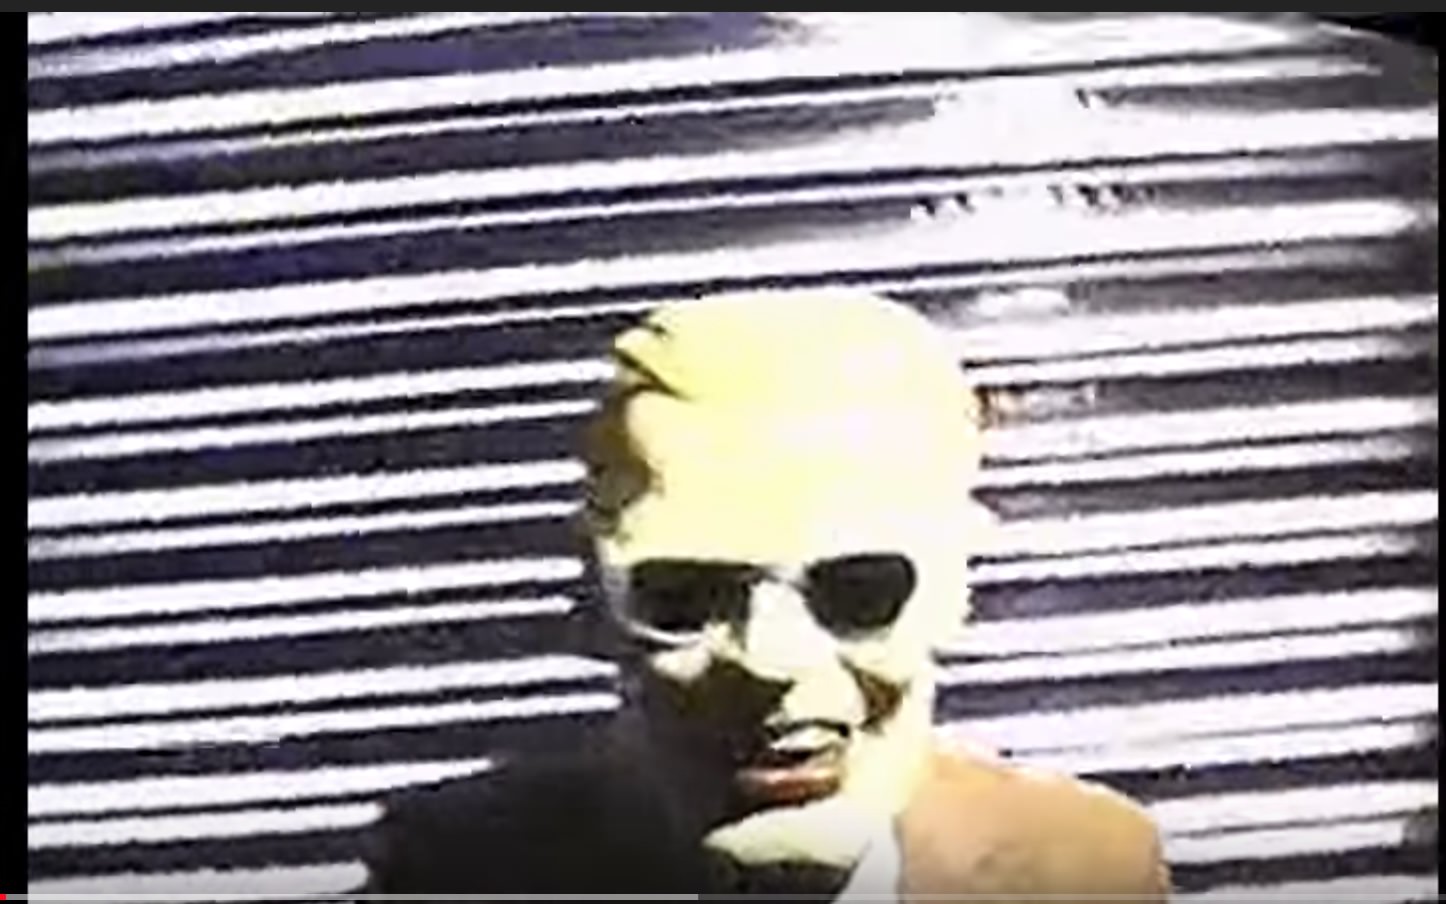 The Max Headroom TV Hacking. Long before the word “hacking” was a part of our national vocabulary, two Chicago television stations in 1987 were briefly taken over by a mysterious hacker, who interrupted broadcast signals and appeared on screen wearing a Max Headroom mask and sunglasses. The first attack happened during a news segment and lasted just 25 seconds, in which the Headroom character said and did nothing. But in the second intrusion during an 11pm broadcast of a Doctor Who broadcast on PBS, the guy dressed like Max mooned the audience and was spanked by a fly swatter.